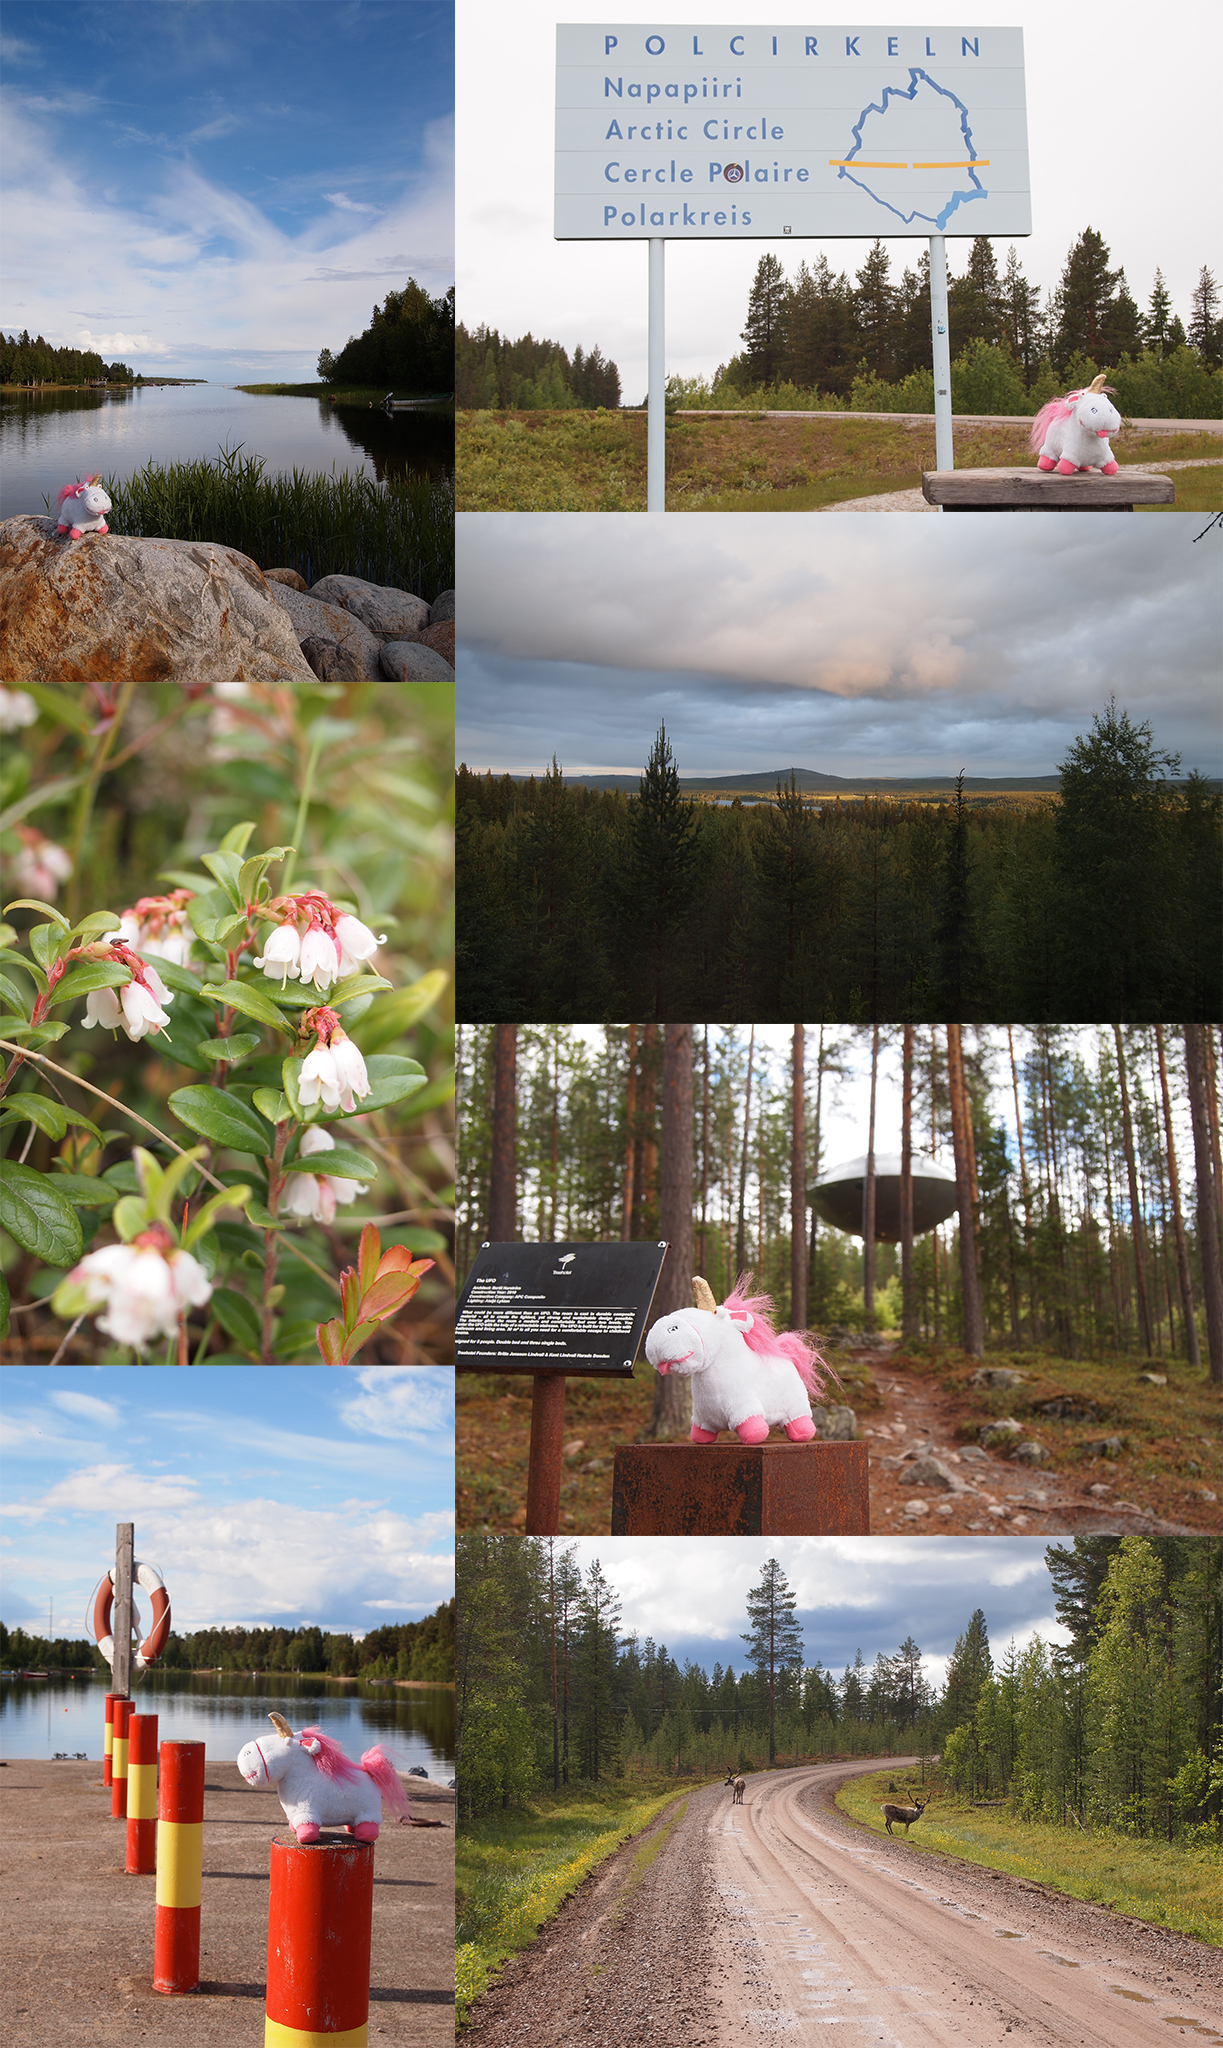 In Lapland Uni saw reindeer, lingonberry flowers, the polar circle, lots of forest ... and an UFO!